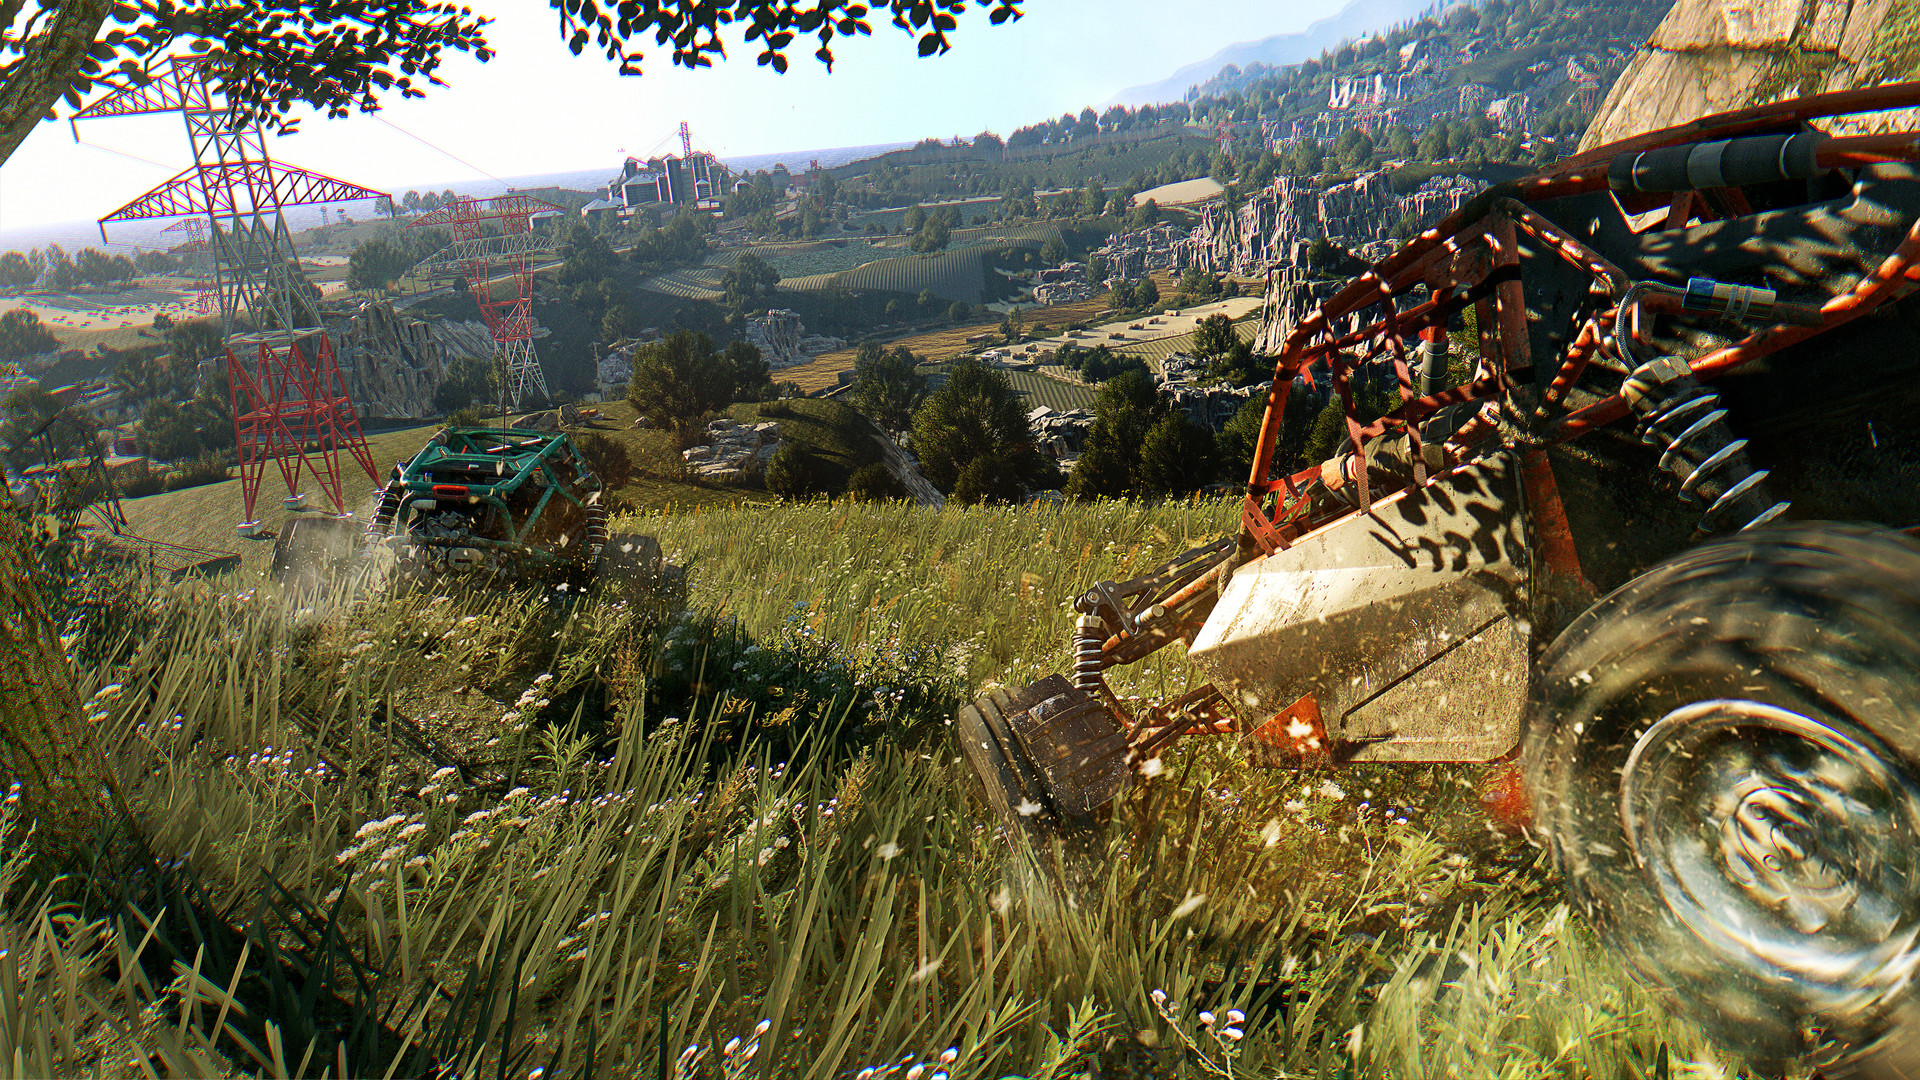 dying light latest patch download